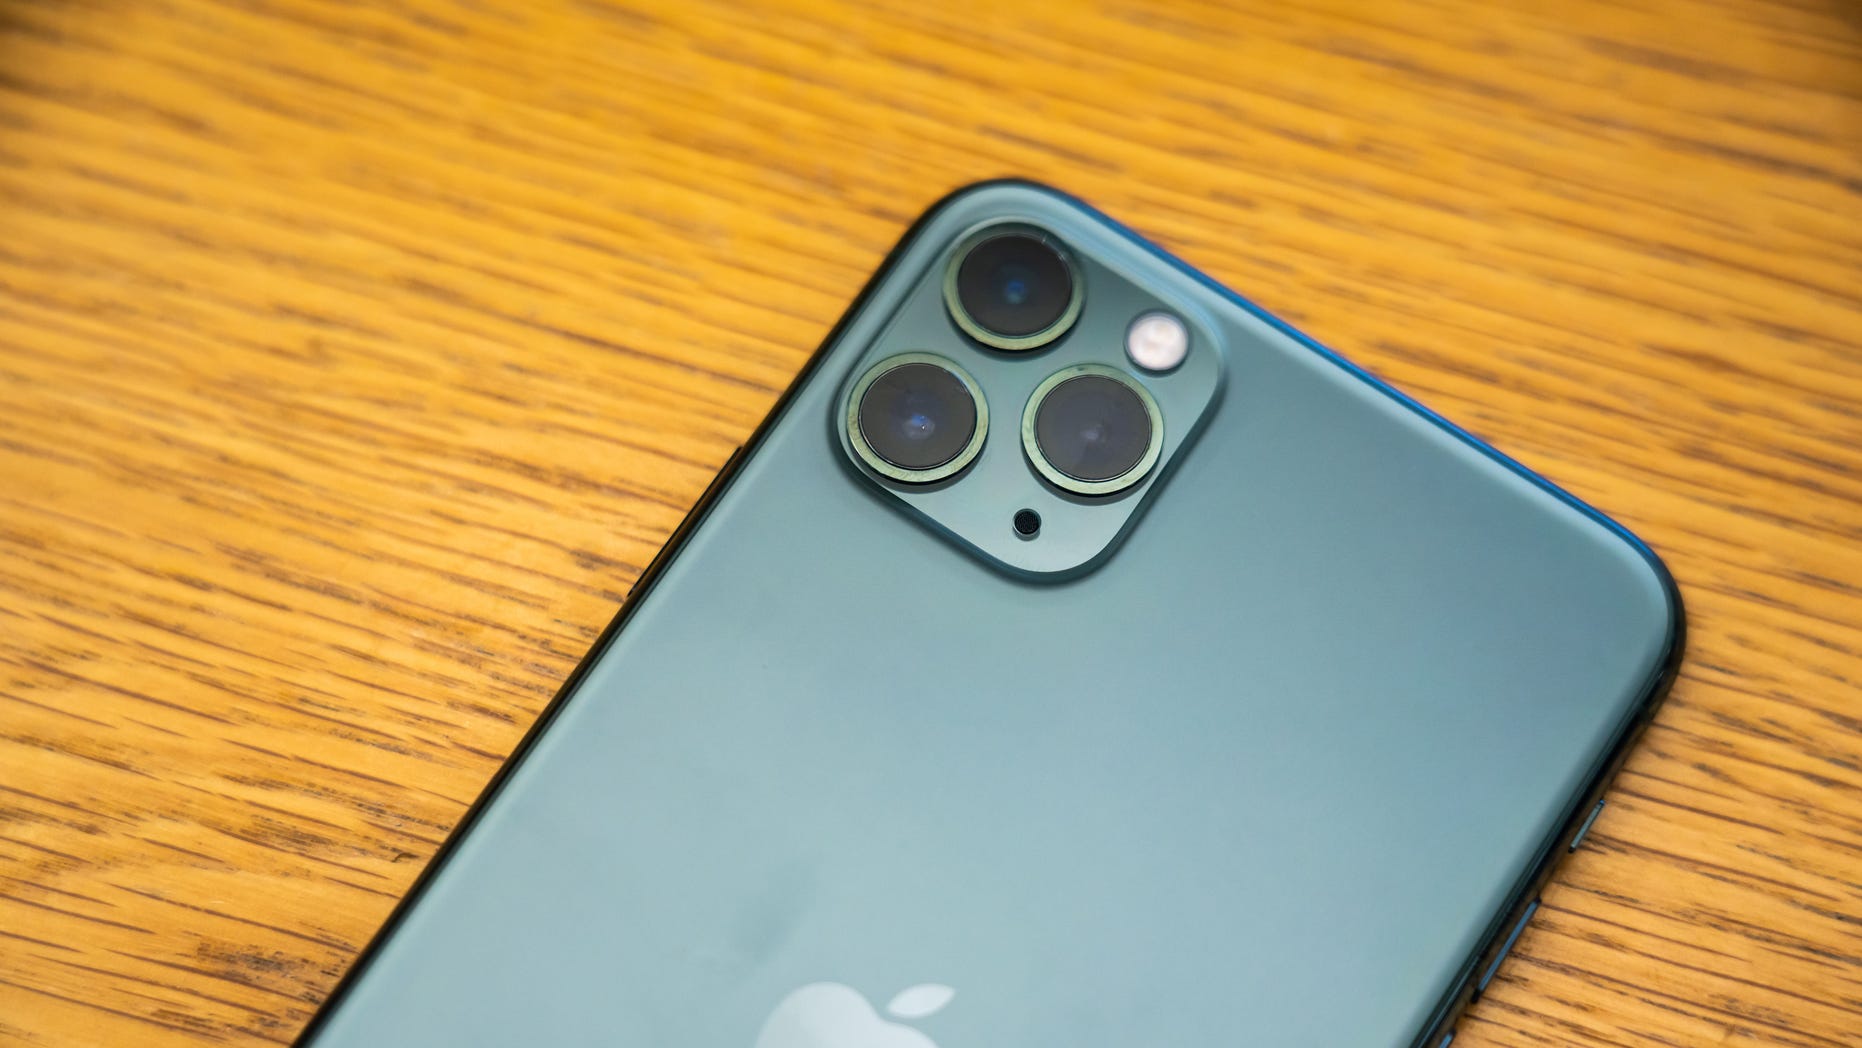 Apple's new iPhone 11 Pro-Max is seen above. (Photo by Alex Tai/SOPA images/light rocket via Getty Images)